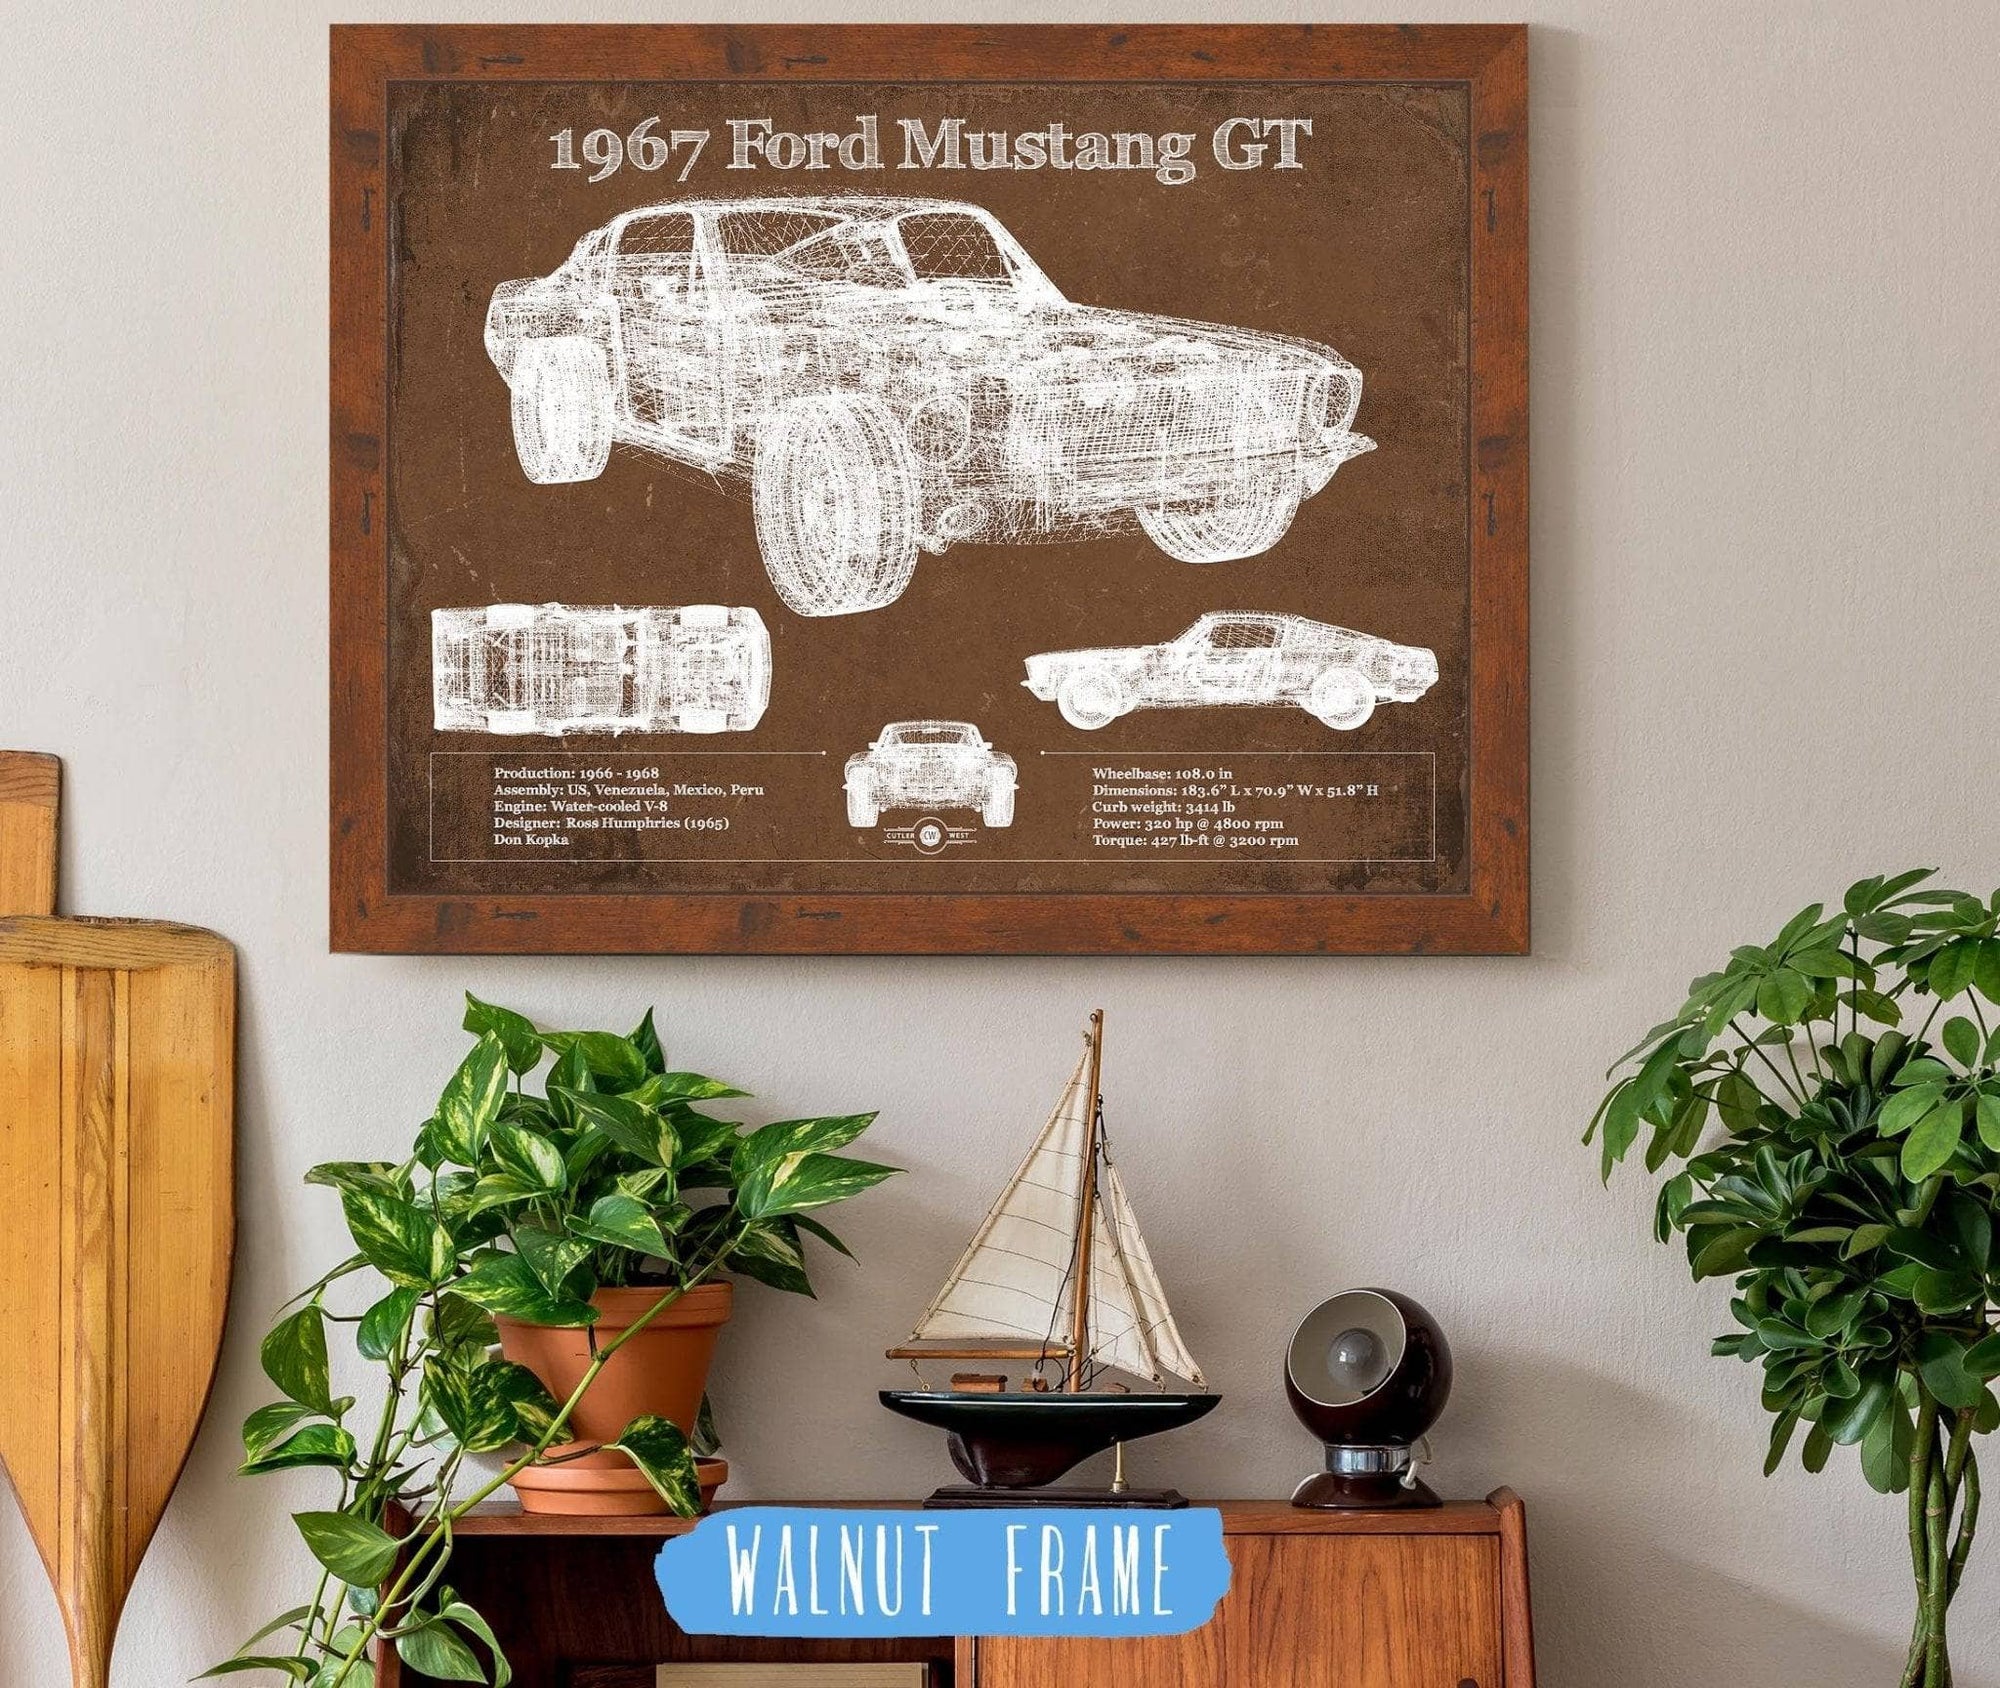 Cutler West Ford Collection 20" x 16" / Walnut Frame 1967 Ford Mustang GT Blueprint Vintage Auto Print 933350035_34100